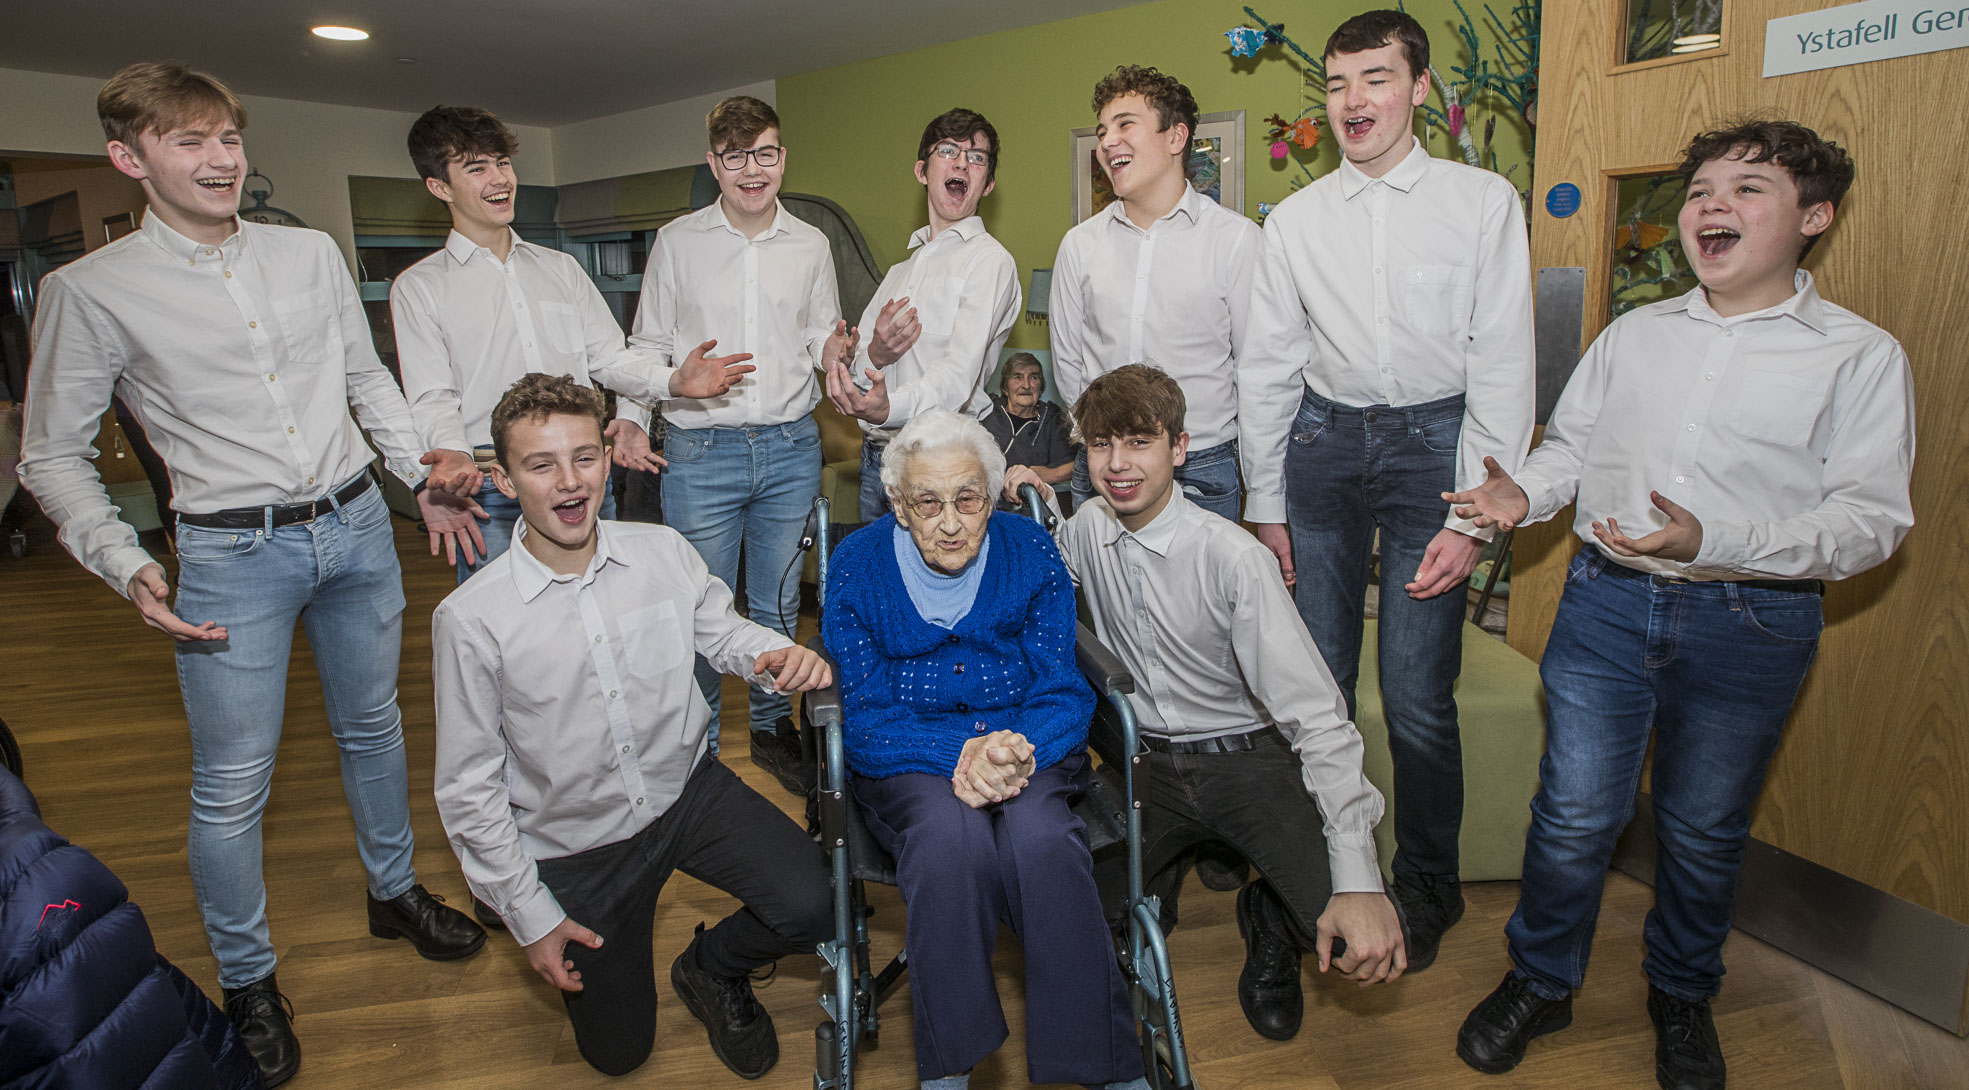 Award news is music to the ears of care home residents